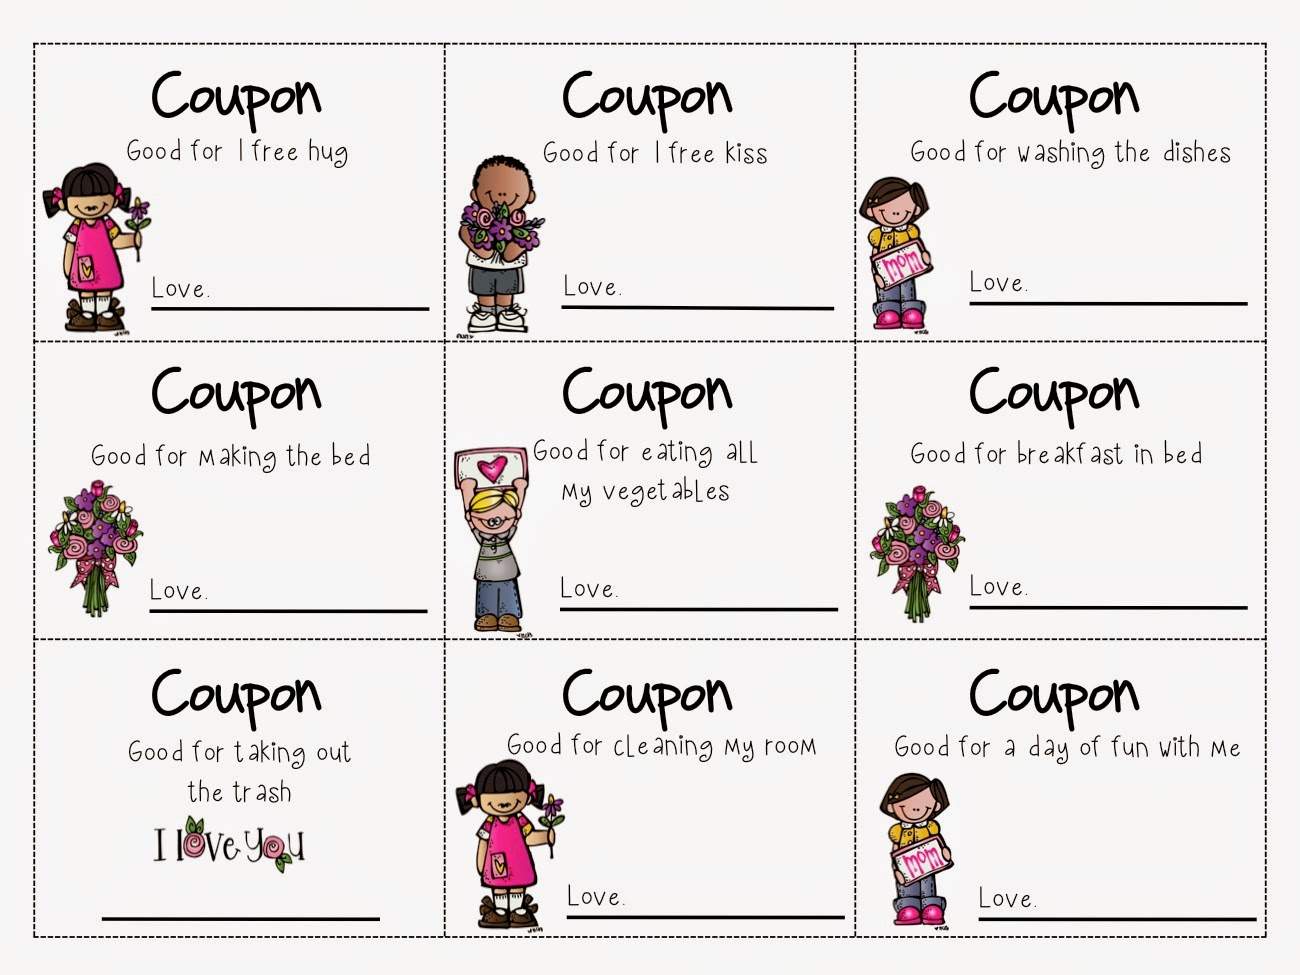 http://www.teacherspayteachers.com/Product/Mothers-Day-Coupons-to-Mom-657284